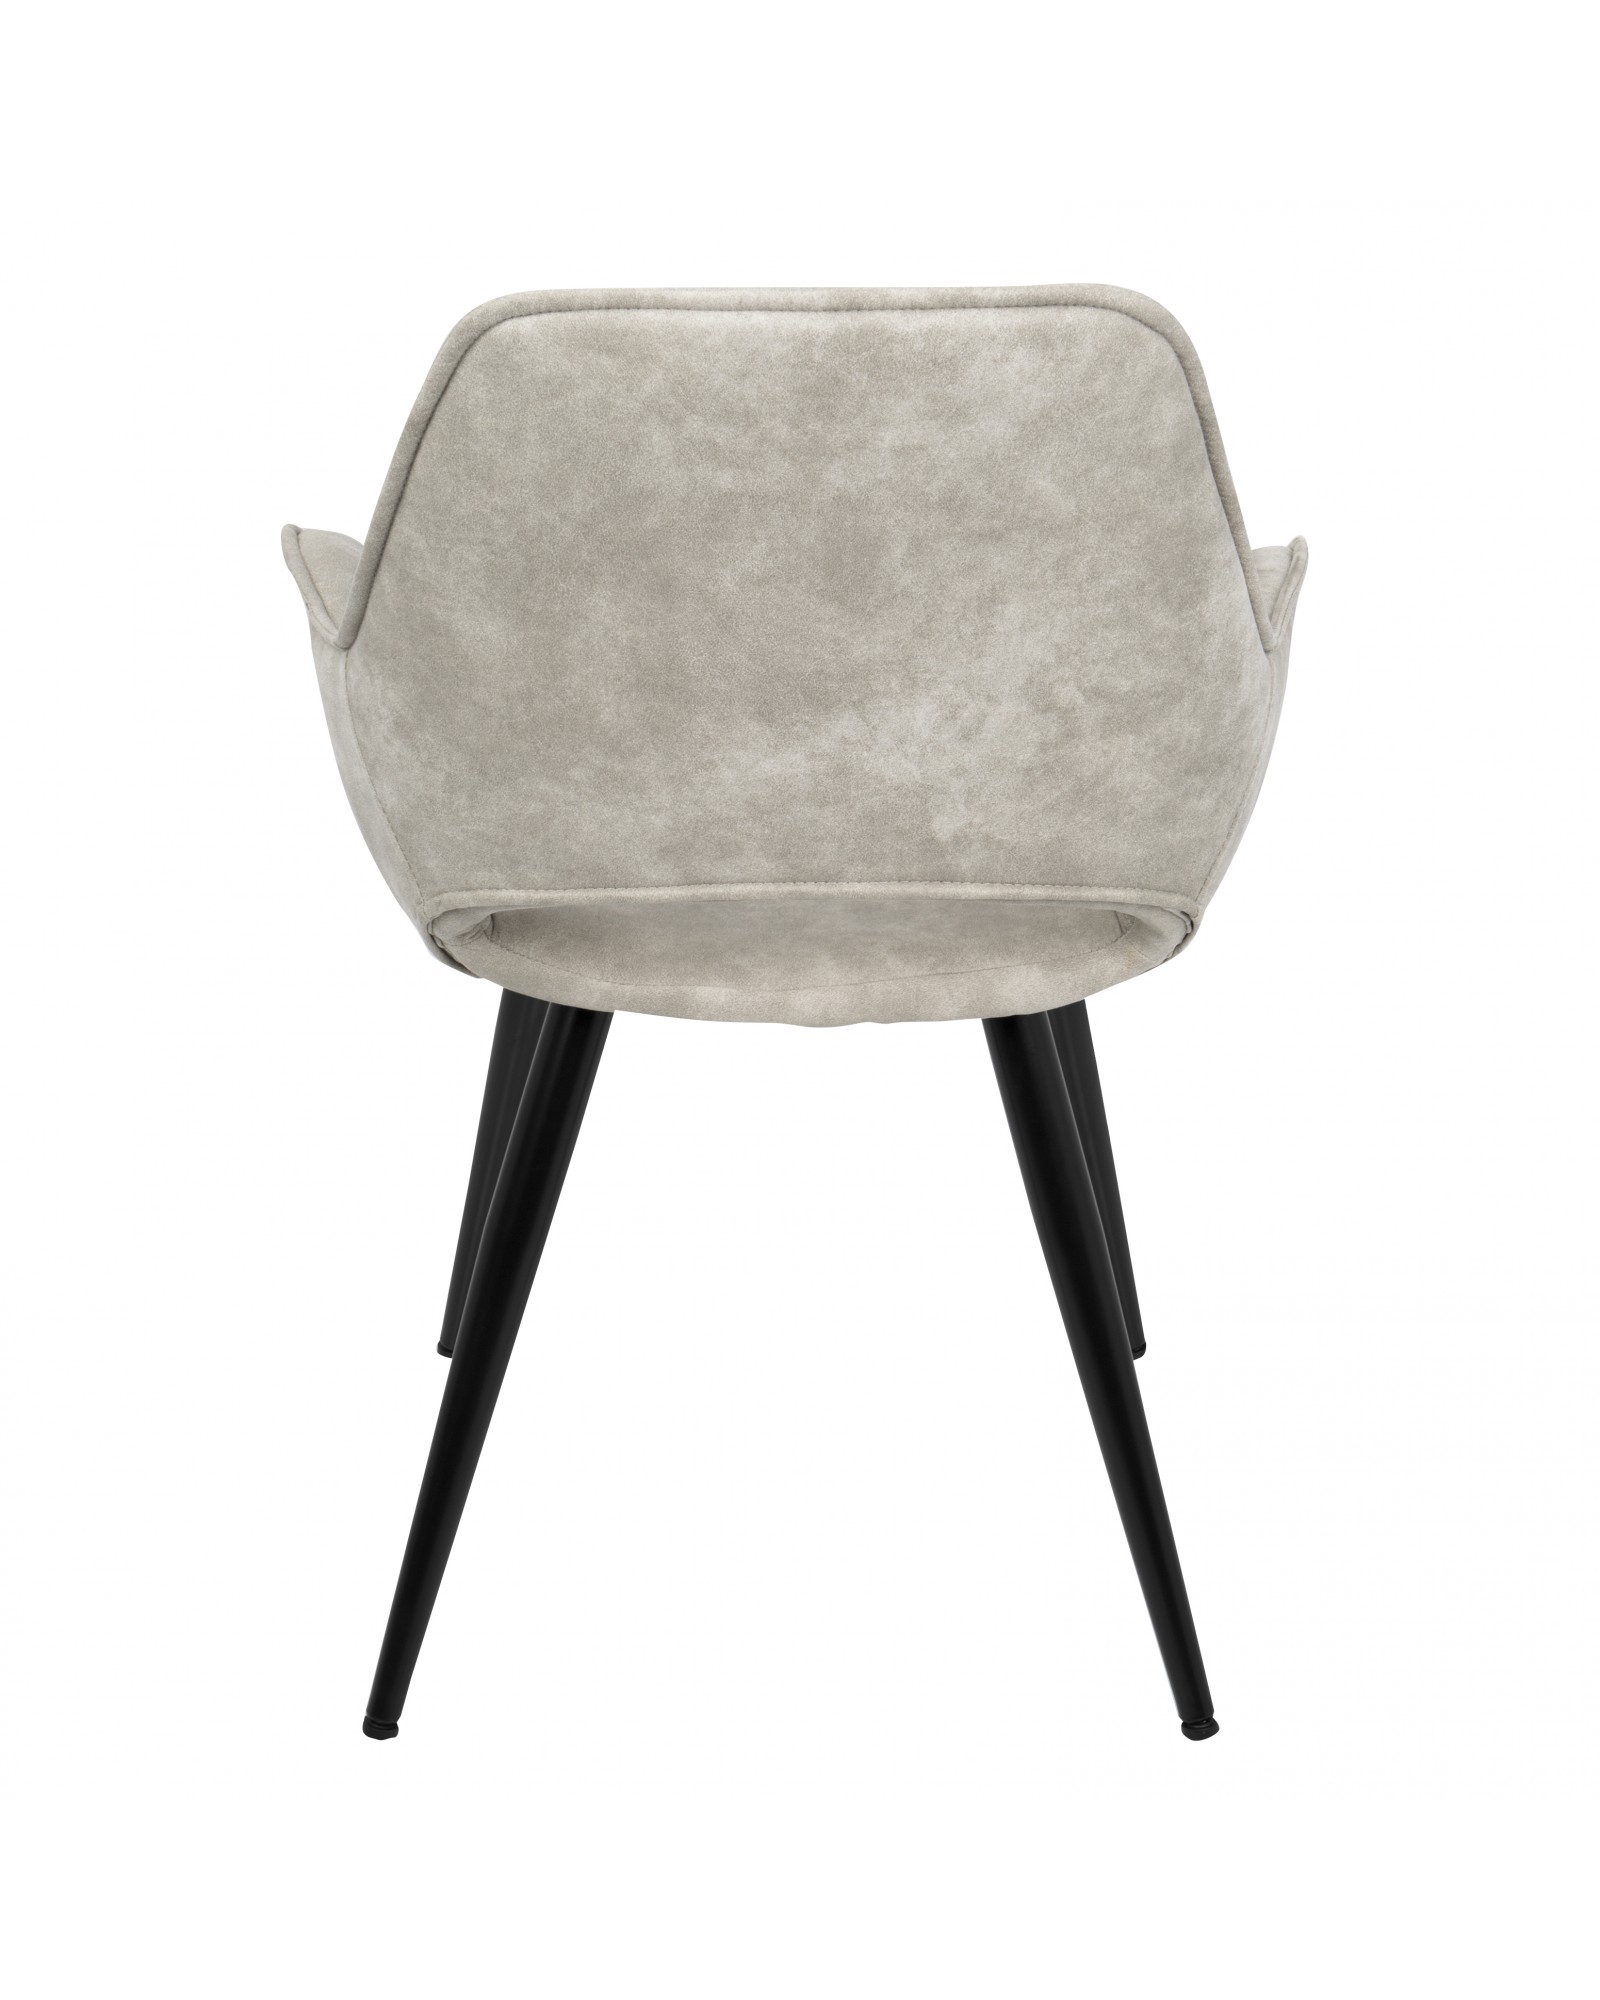 Mustang Contemporary Dining/Accent Chair in Beige - Set of 2